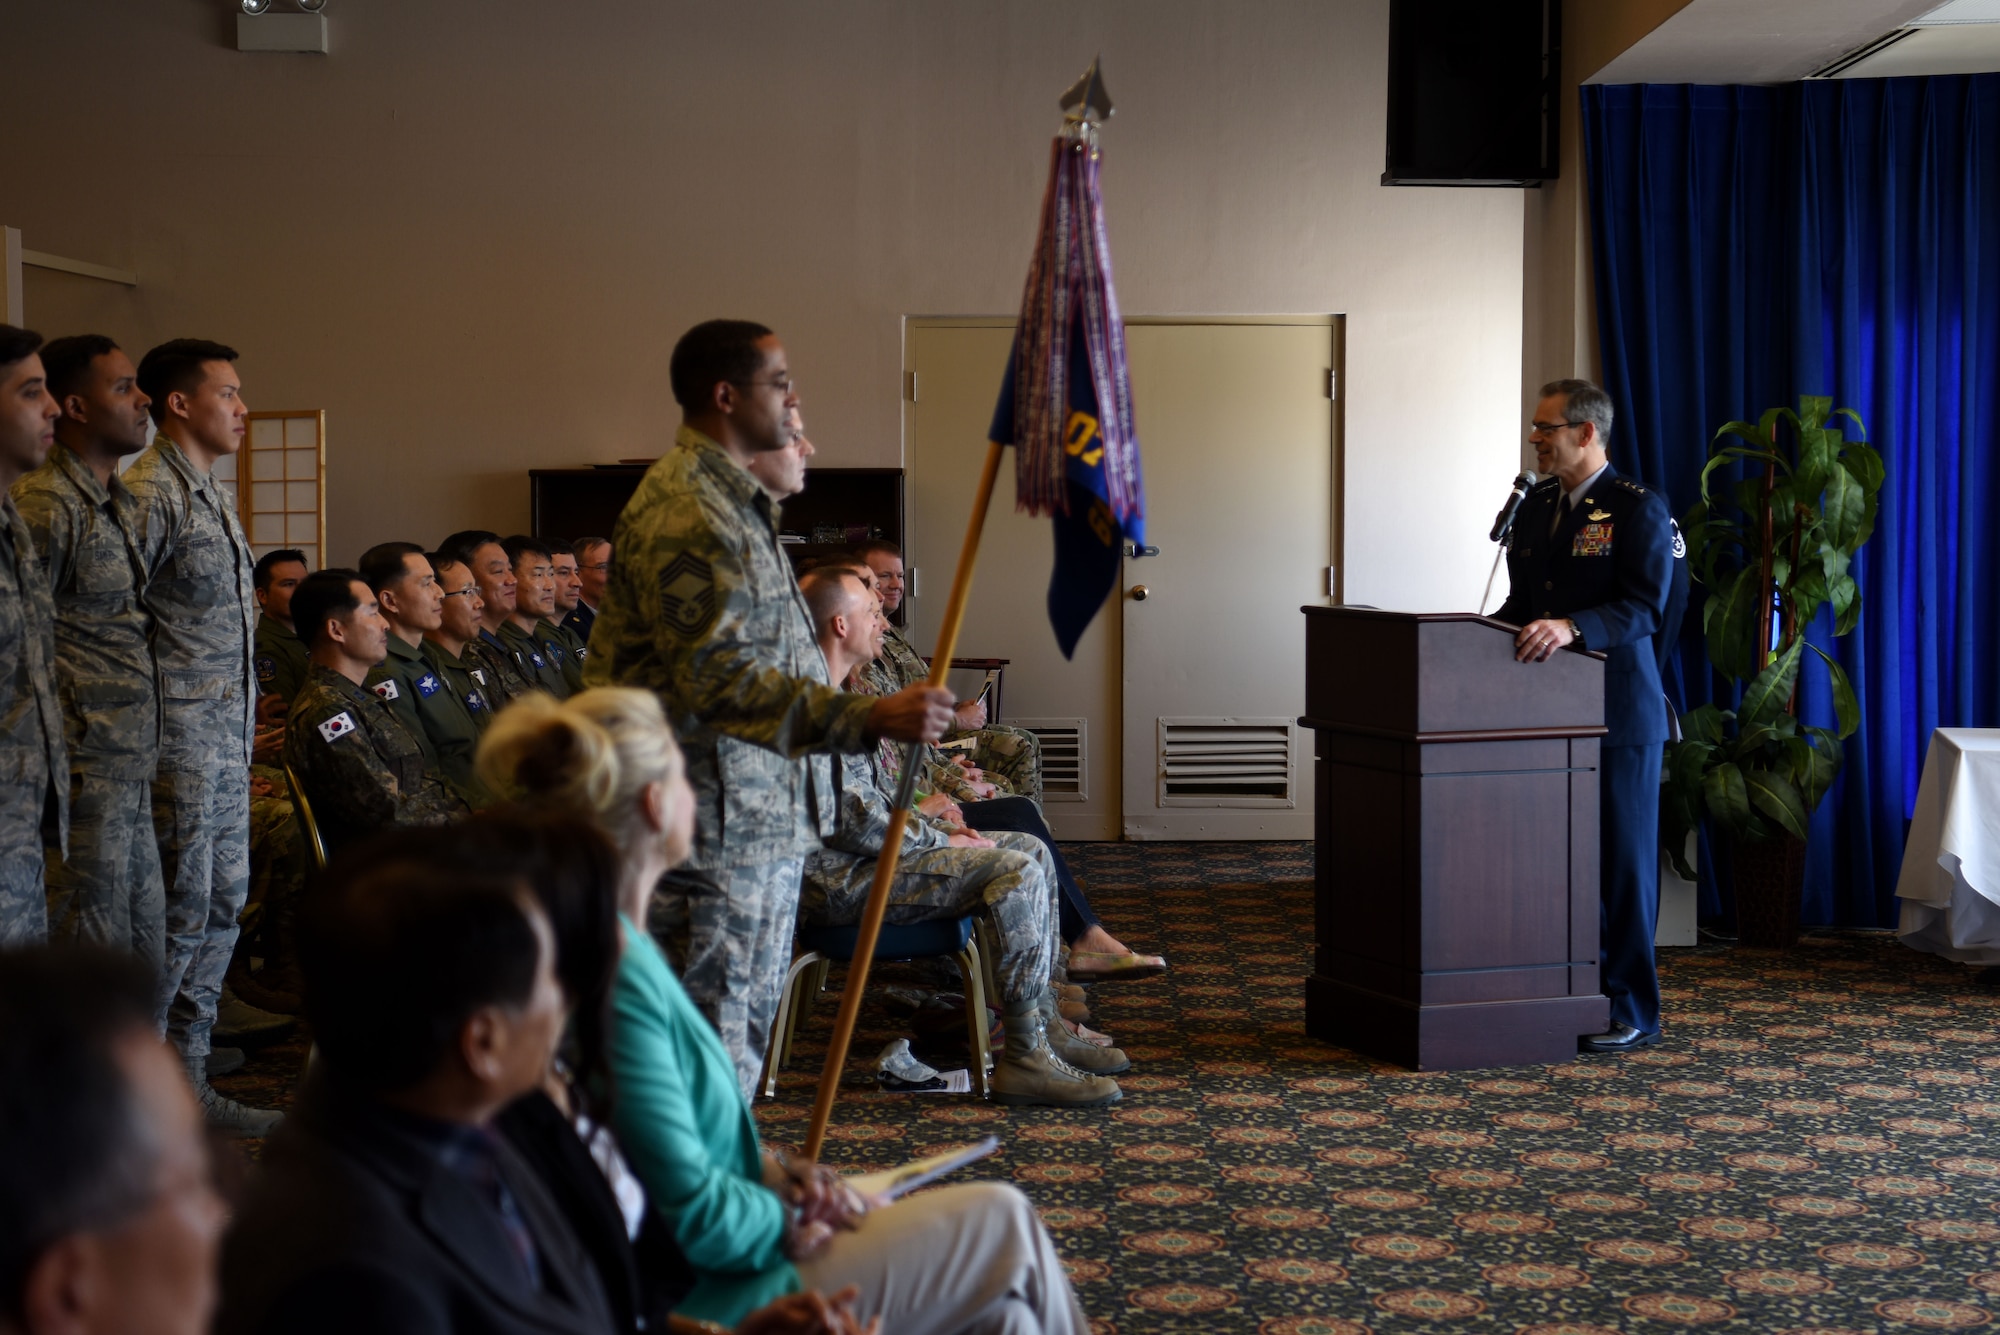 U.S. Air Force Lt. Gen. Kenneth Wilsbach, Seventh Air Force commander, speaks at an assumption of command ceremony for the 607th Air Operations Center at Osan Air Base, Republic of Korea, April 5, 2019. Wilsbach spoke about Col. Christopher Russell, the incoming commander, who has commanded operations centers at Joint Base Pearl Harbor-Hickam, Hawaii and Joint Base San Antonio-Lackland, Texas. (U.S. Air Force photo by Staff Sgt. Kelsey Tucker)